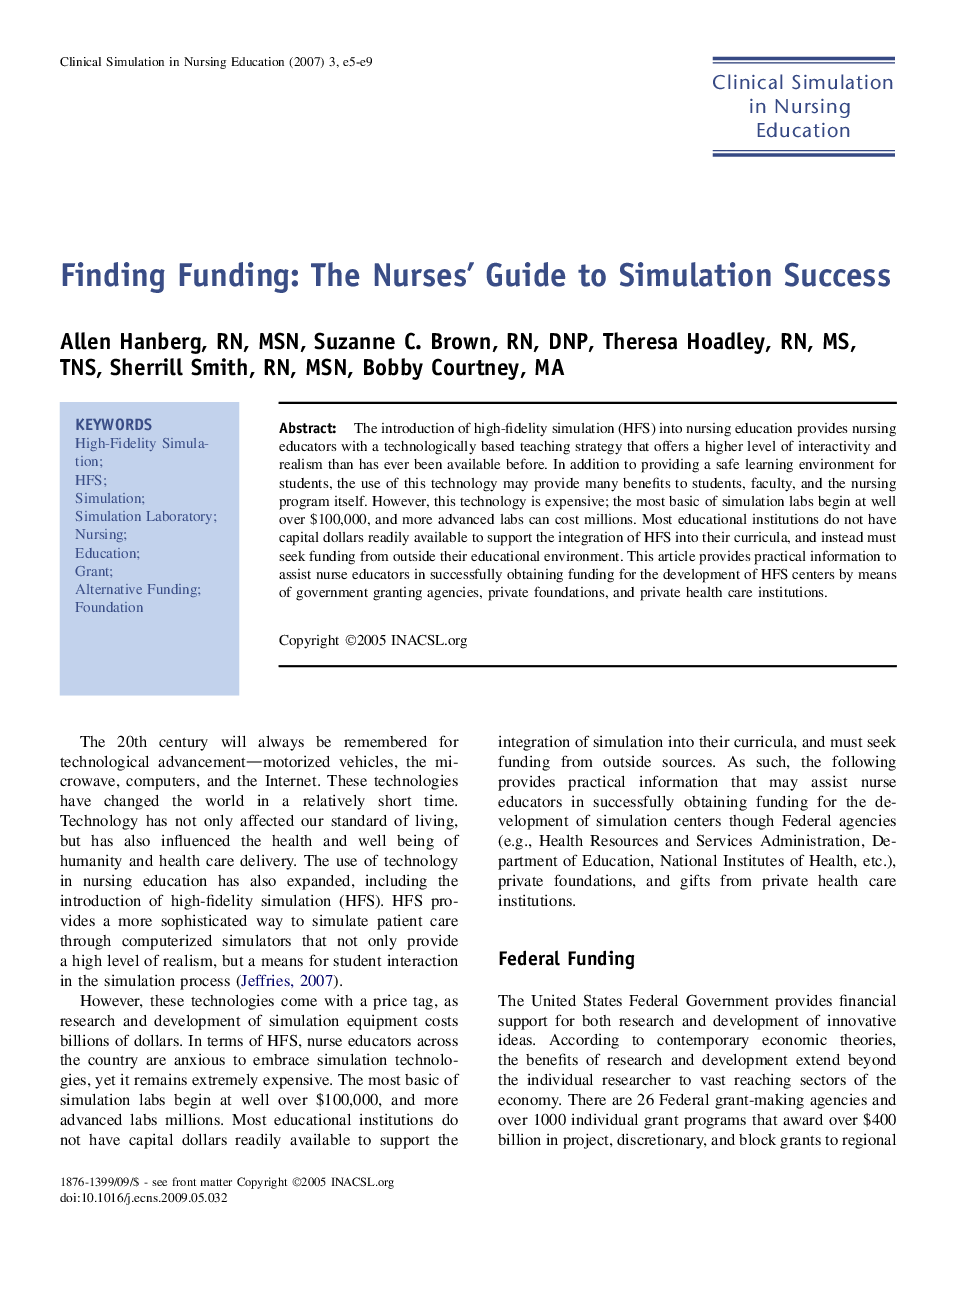 Finding Funding: The Nurses' Guide to Simulation Success